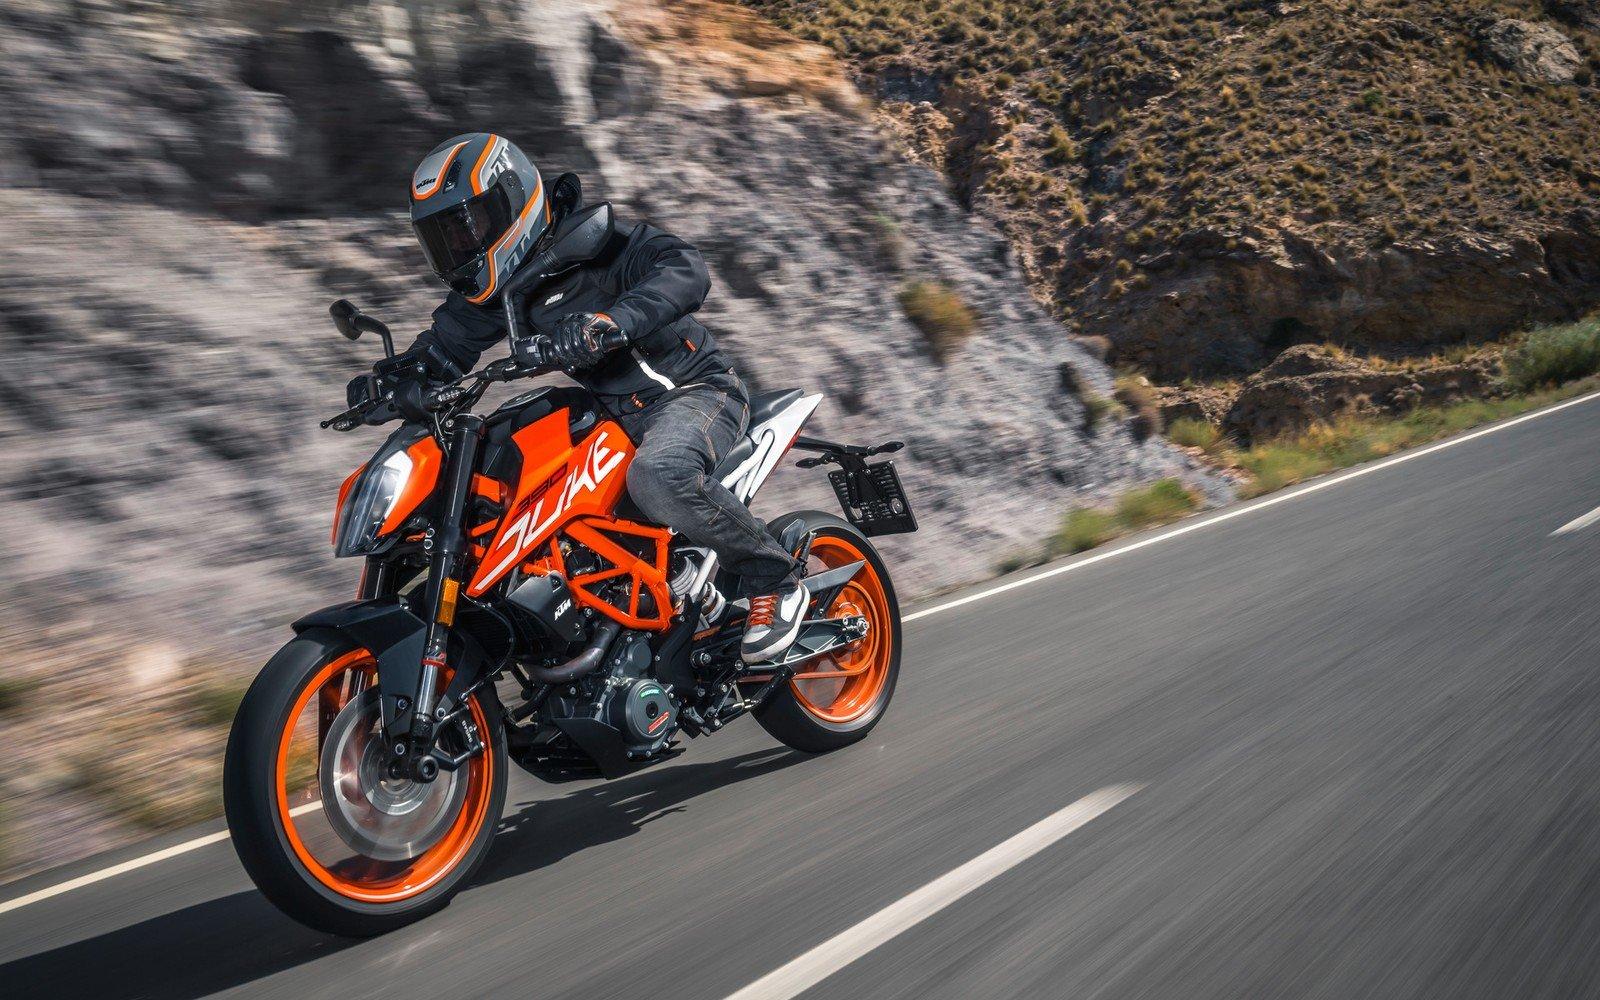 KTM Duke 390 Picture, Photo, Wallpaper And Video